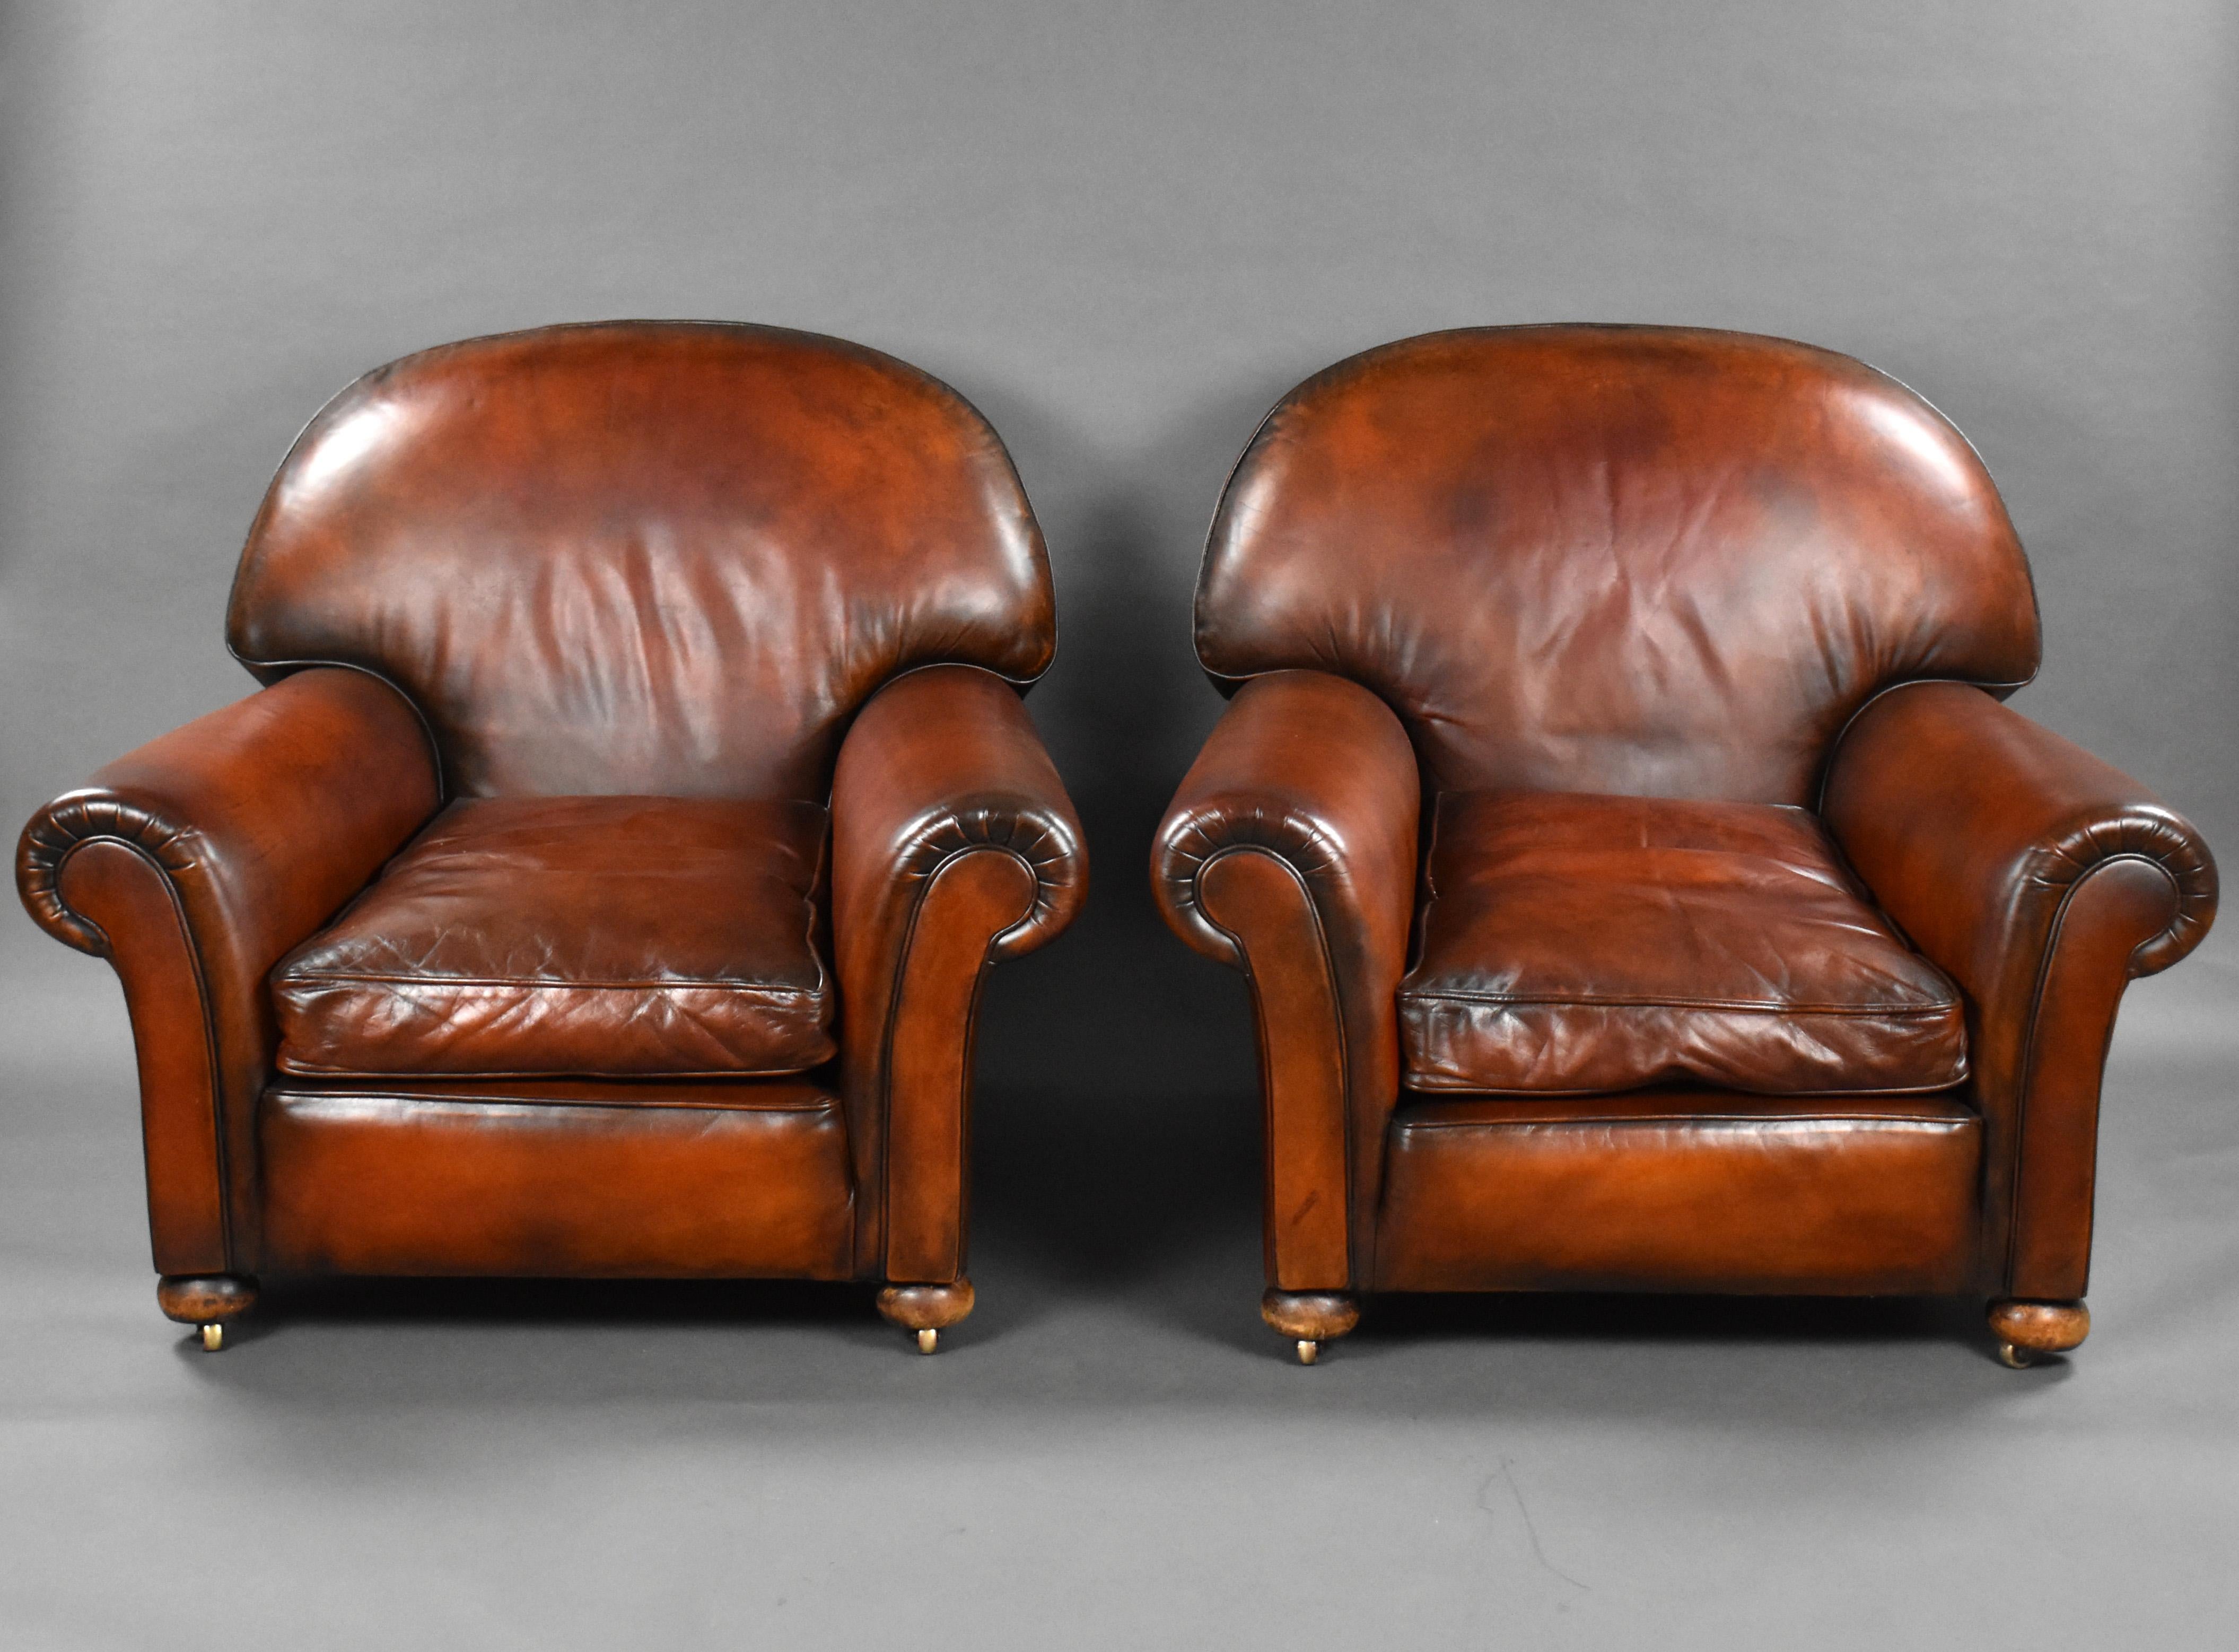 For sale is a good quality pair of large antique hand dyed leather club chairs, with feather stuffed seats, standing on bun feet. Each chair remains in good order. 

Measures: Width: 100cm Depth: 103cm Height: 82cm.